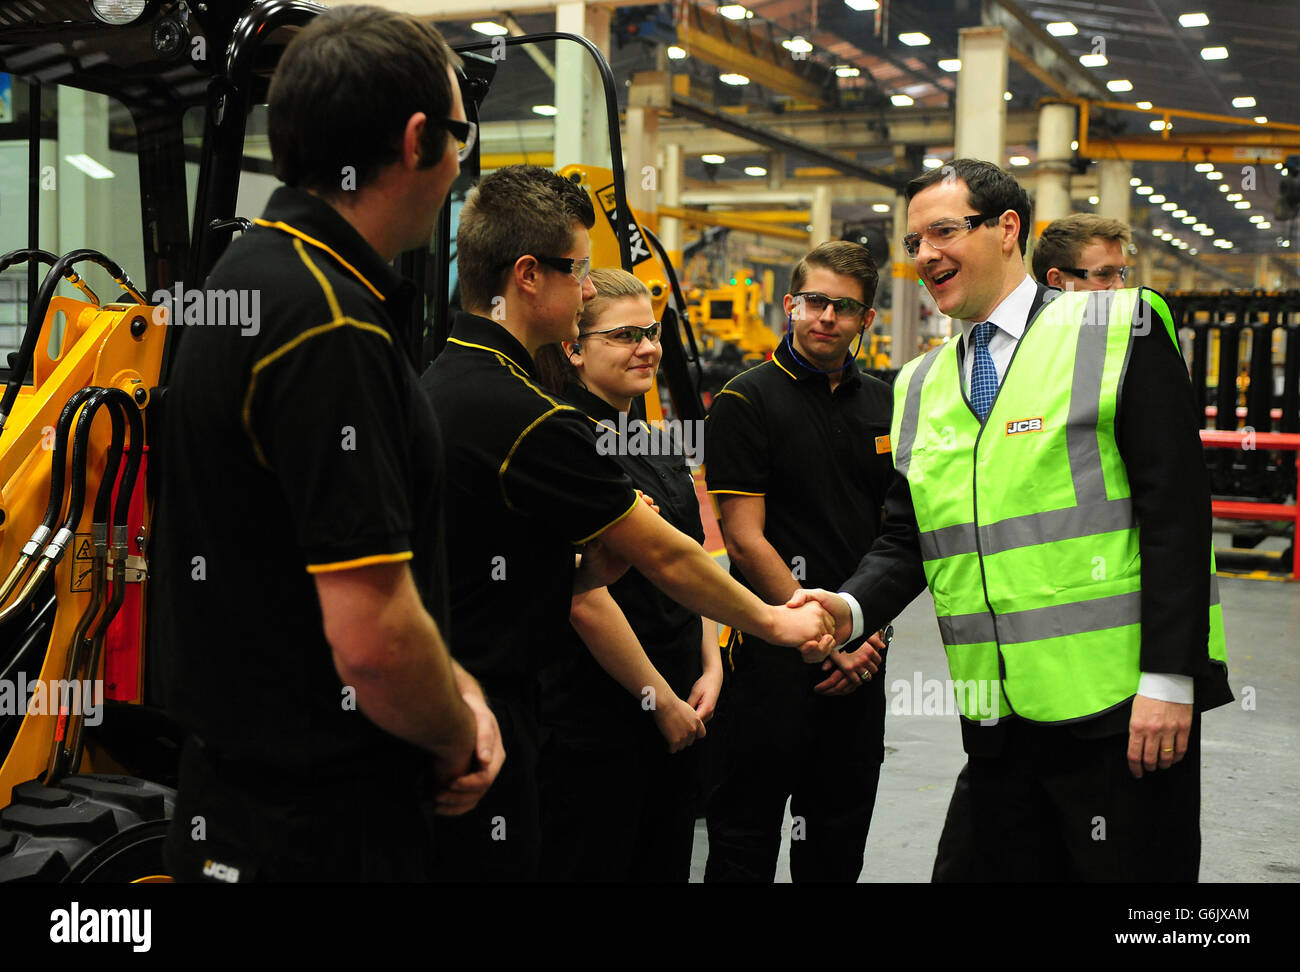 The Chancellor of the Exchequer George Osborne meets apprentices during a visit to JCB's backhoe loader factory in Rocester, Staffordshire. JCB announced today plans to invest £150 million to expand its operations in Staffordshire and create an additional 2.500 jobs by 2018. Stock Photo